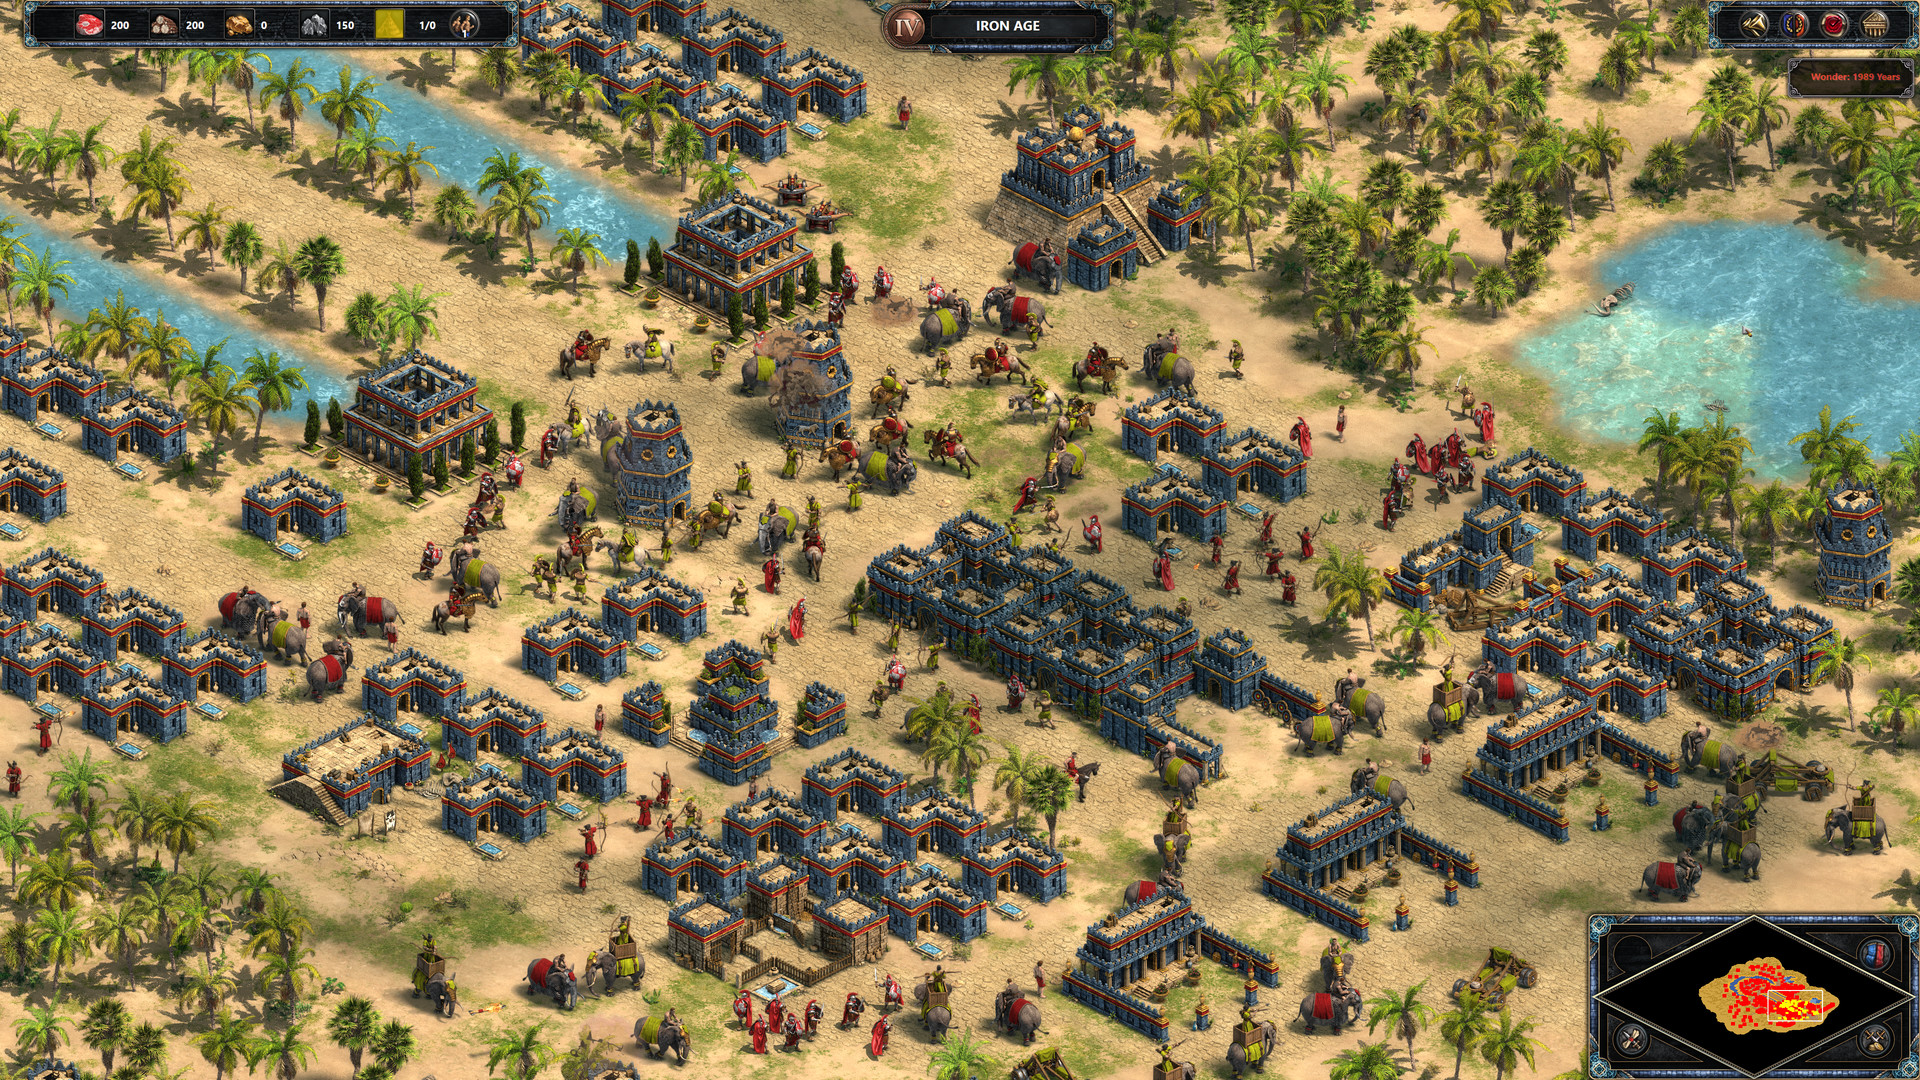 Find the best laptops for Age of Empires